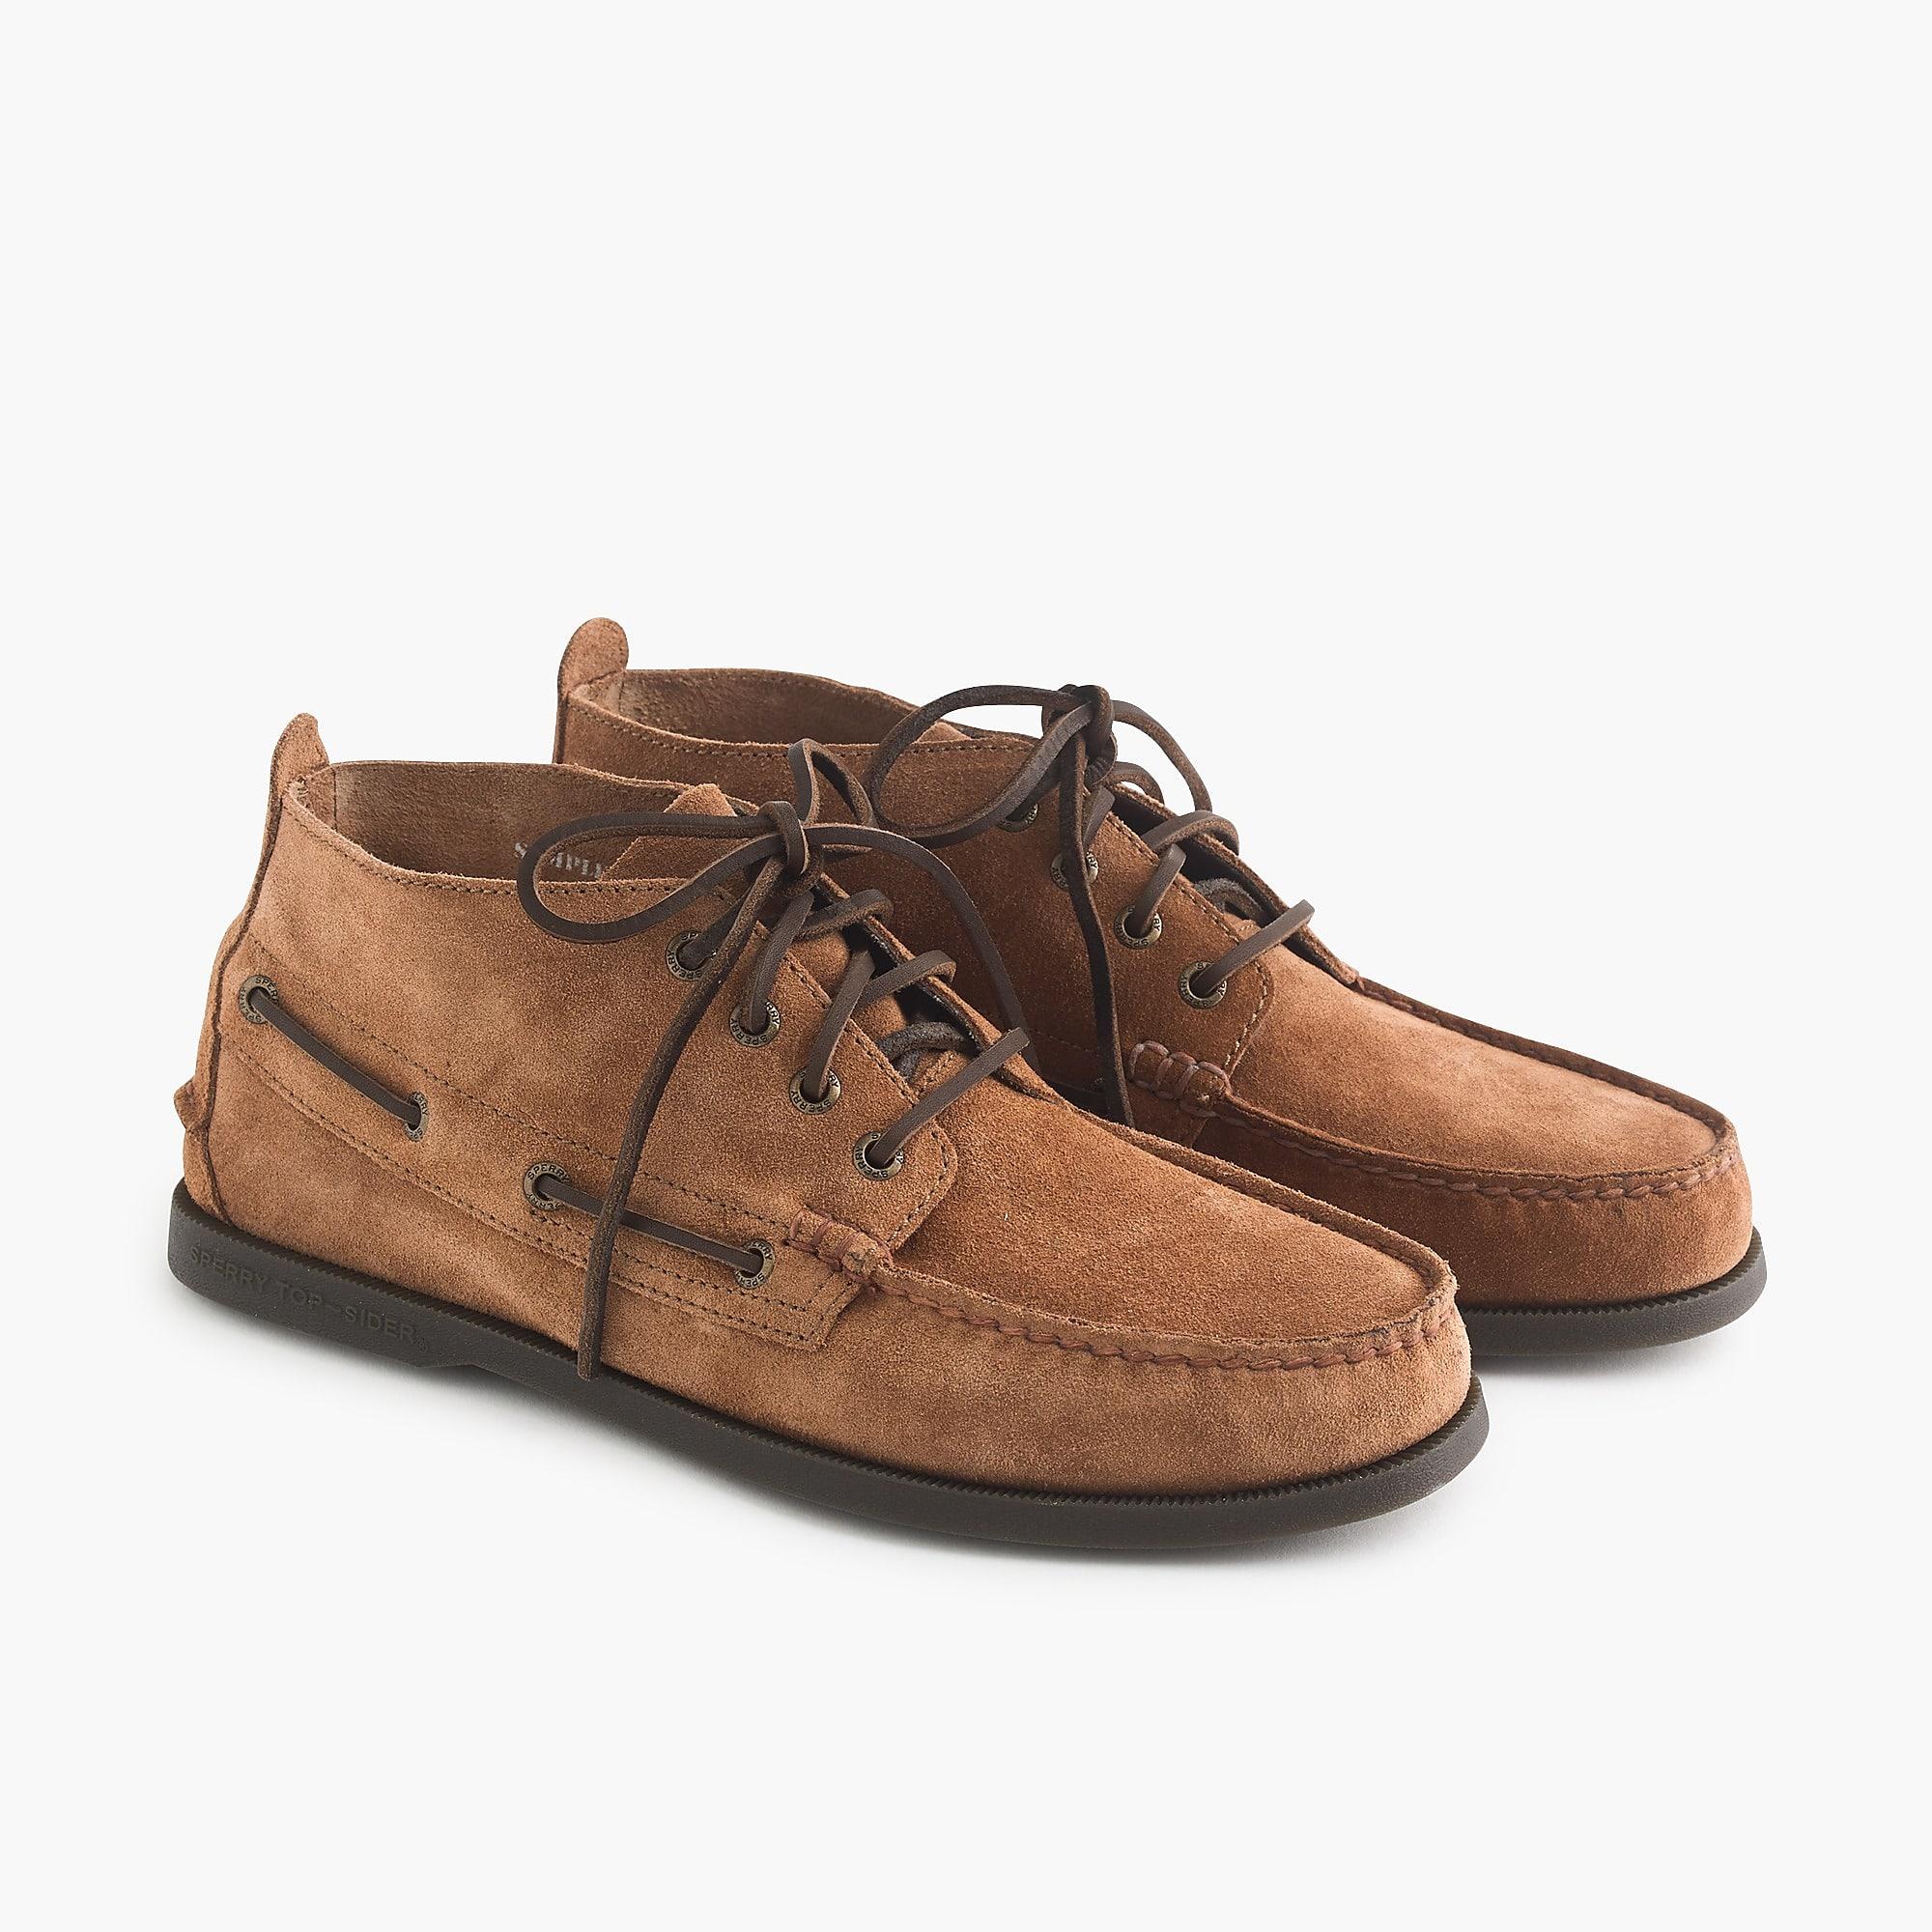 sperry top sider chukka boots